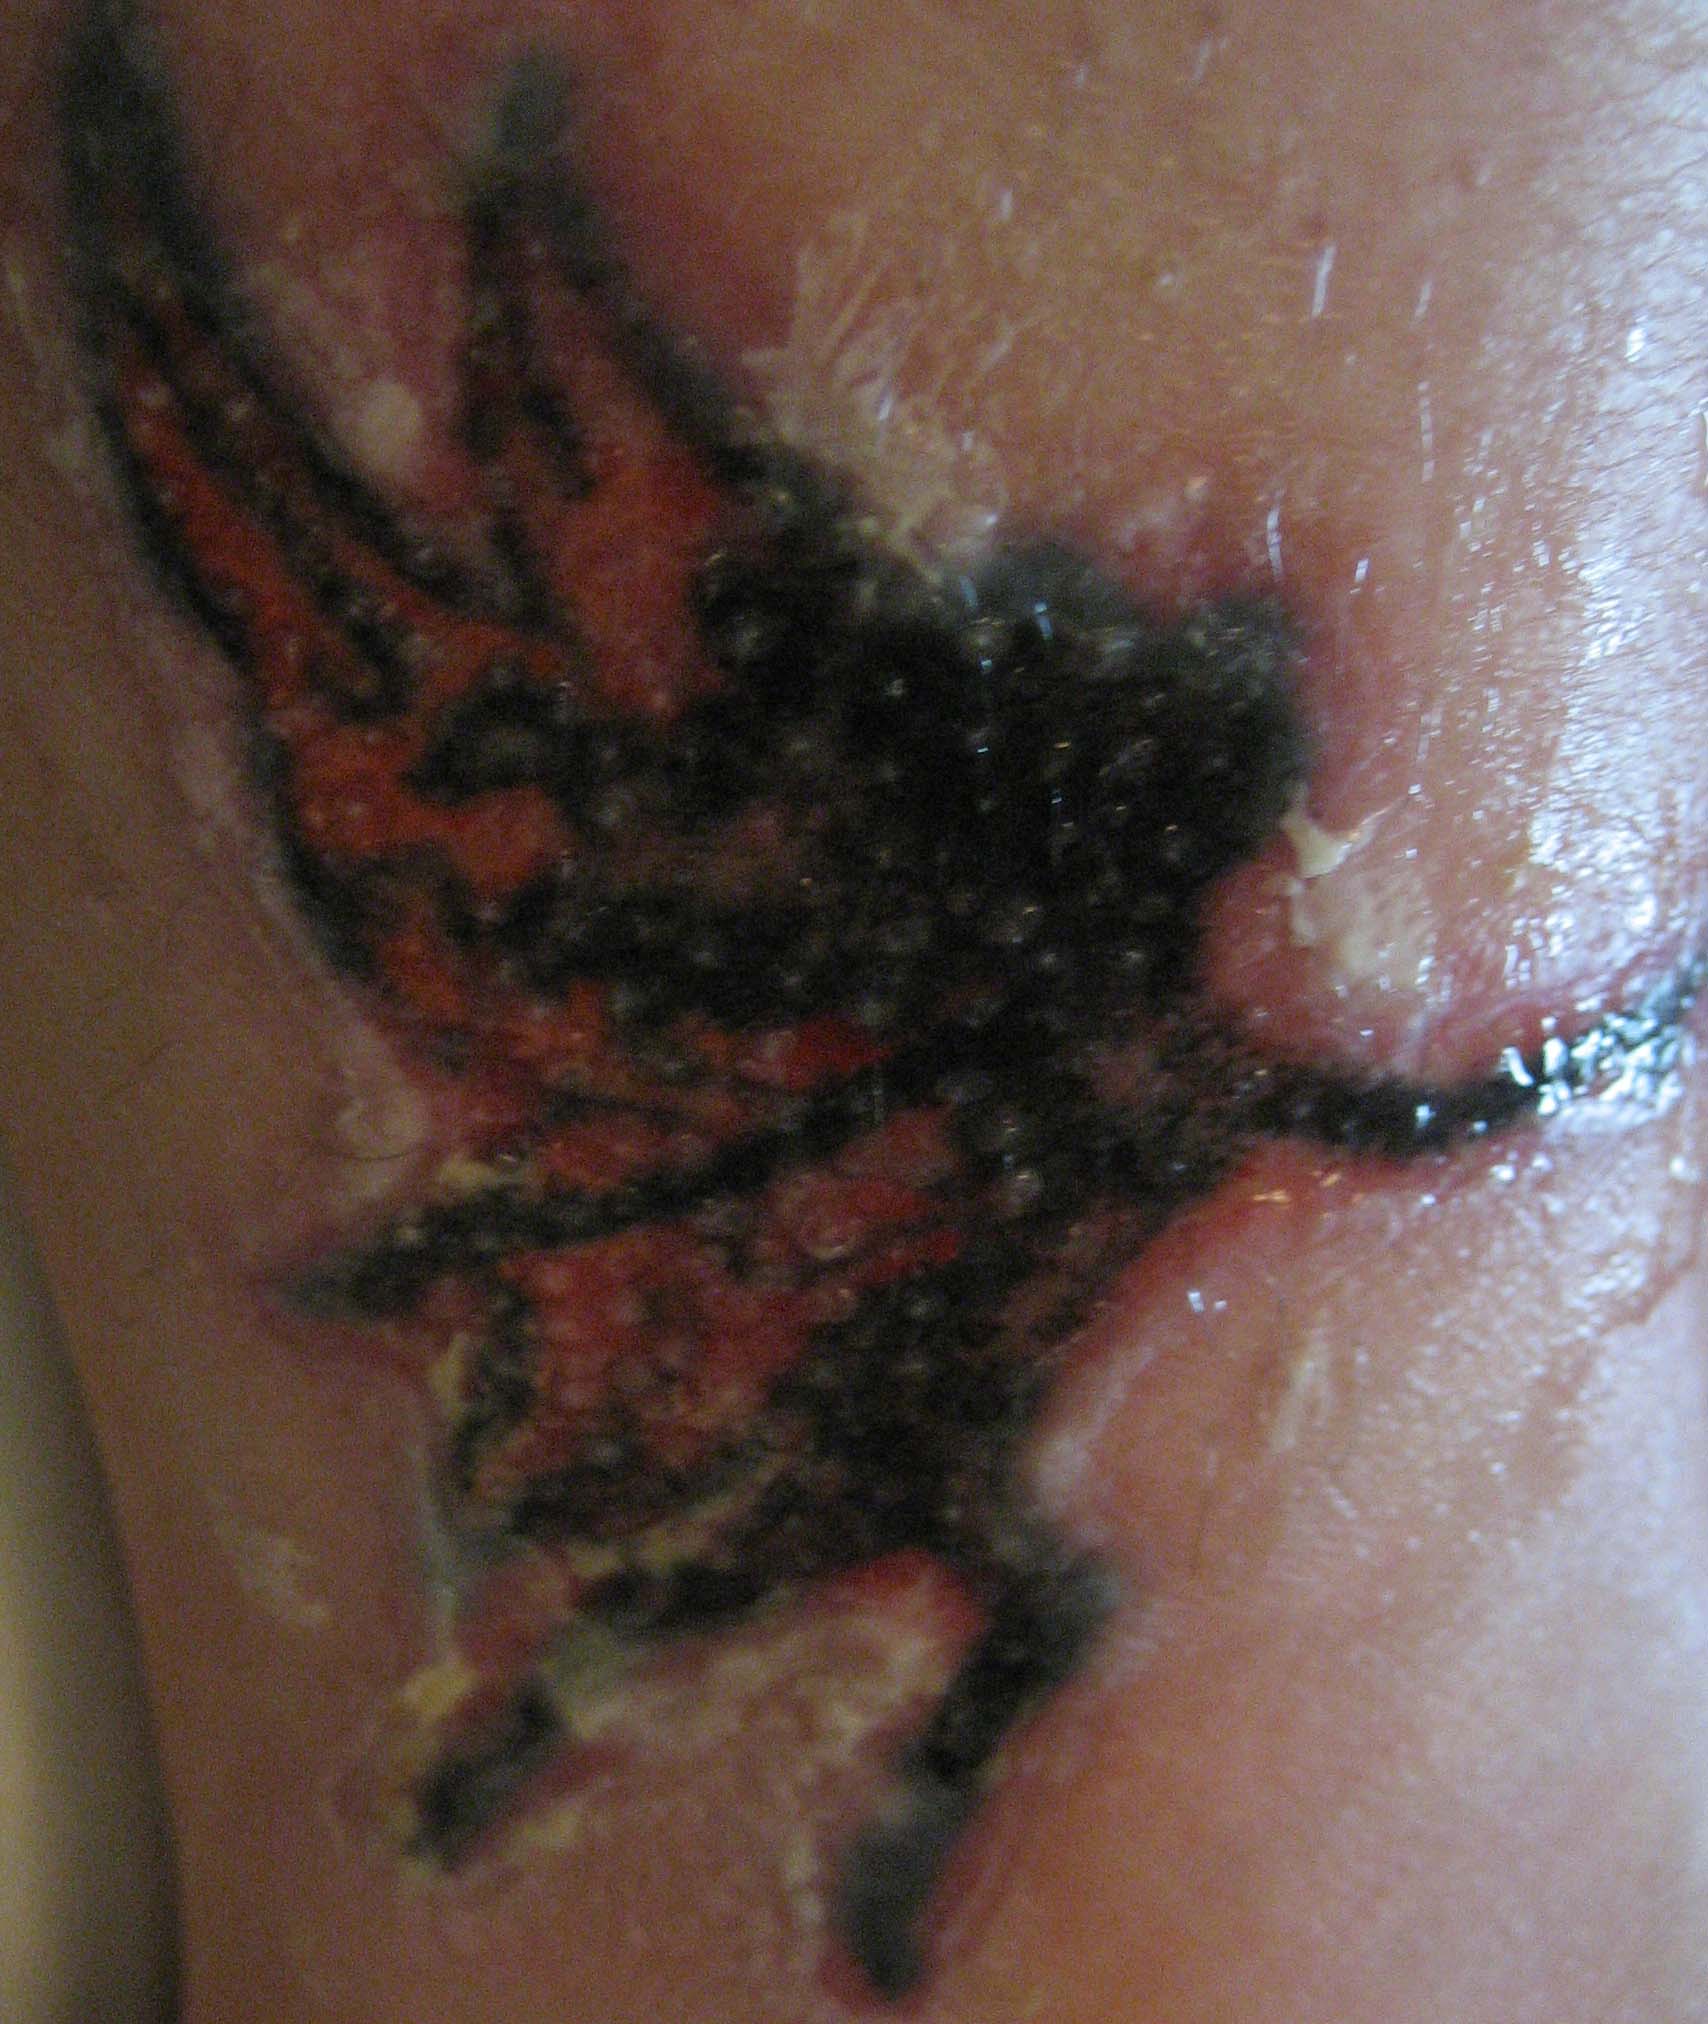 Nuviderm tattoo removal works,